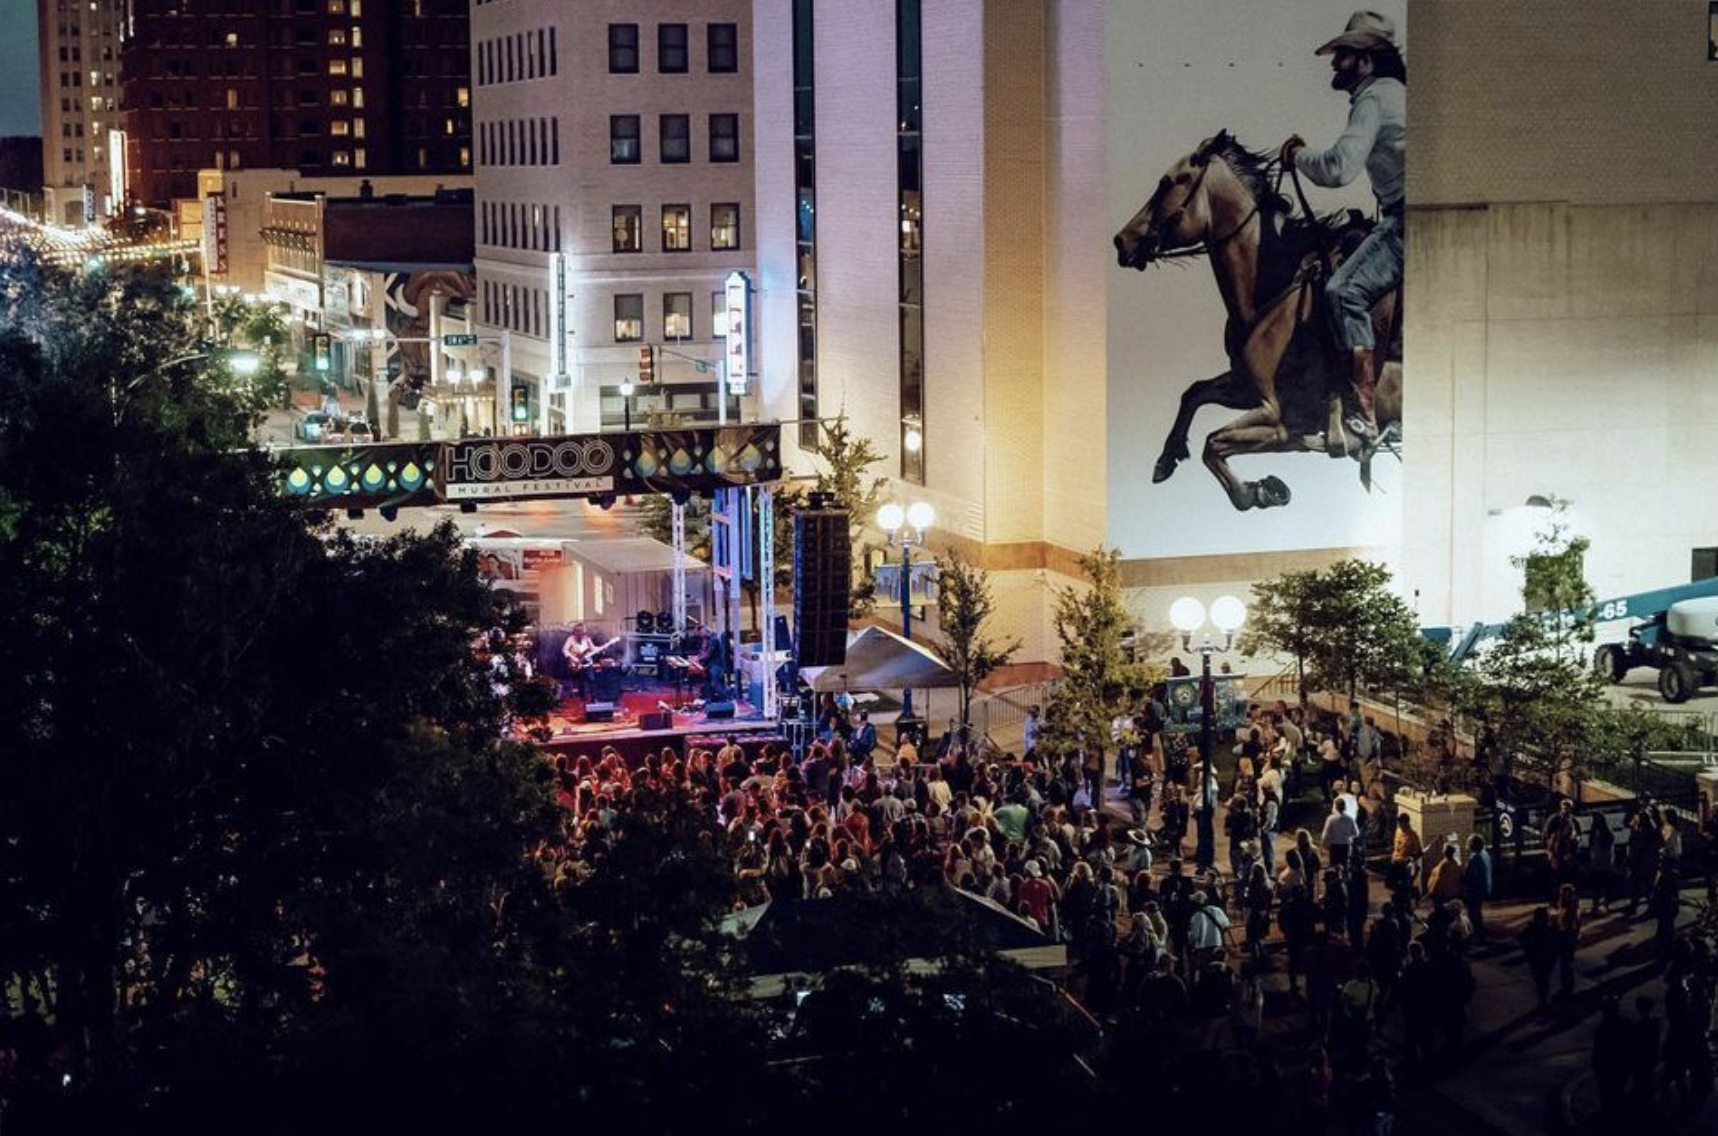 Photo of large audience in downtown amarillo with a mural featuring a man wearing a white shirt riding a brown horse and stage with purple lights